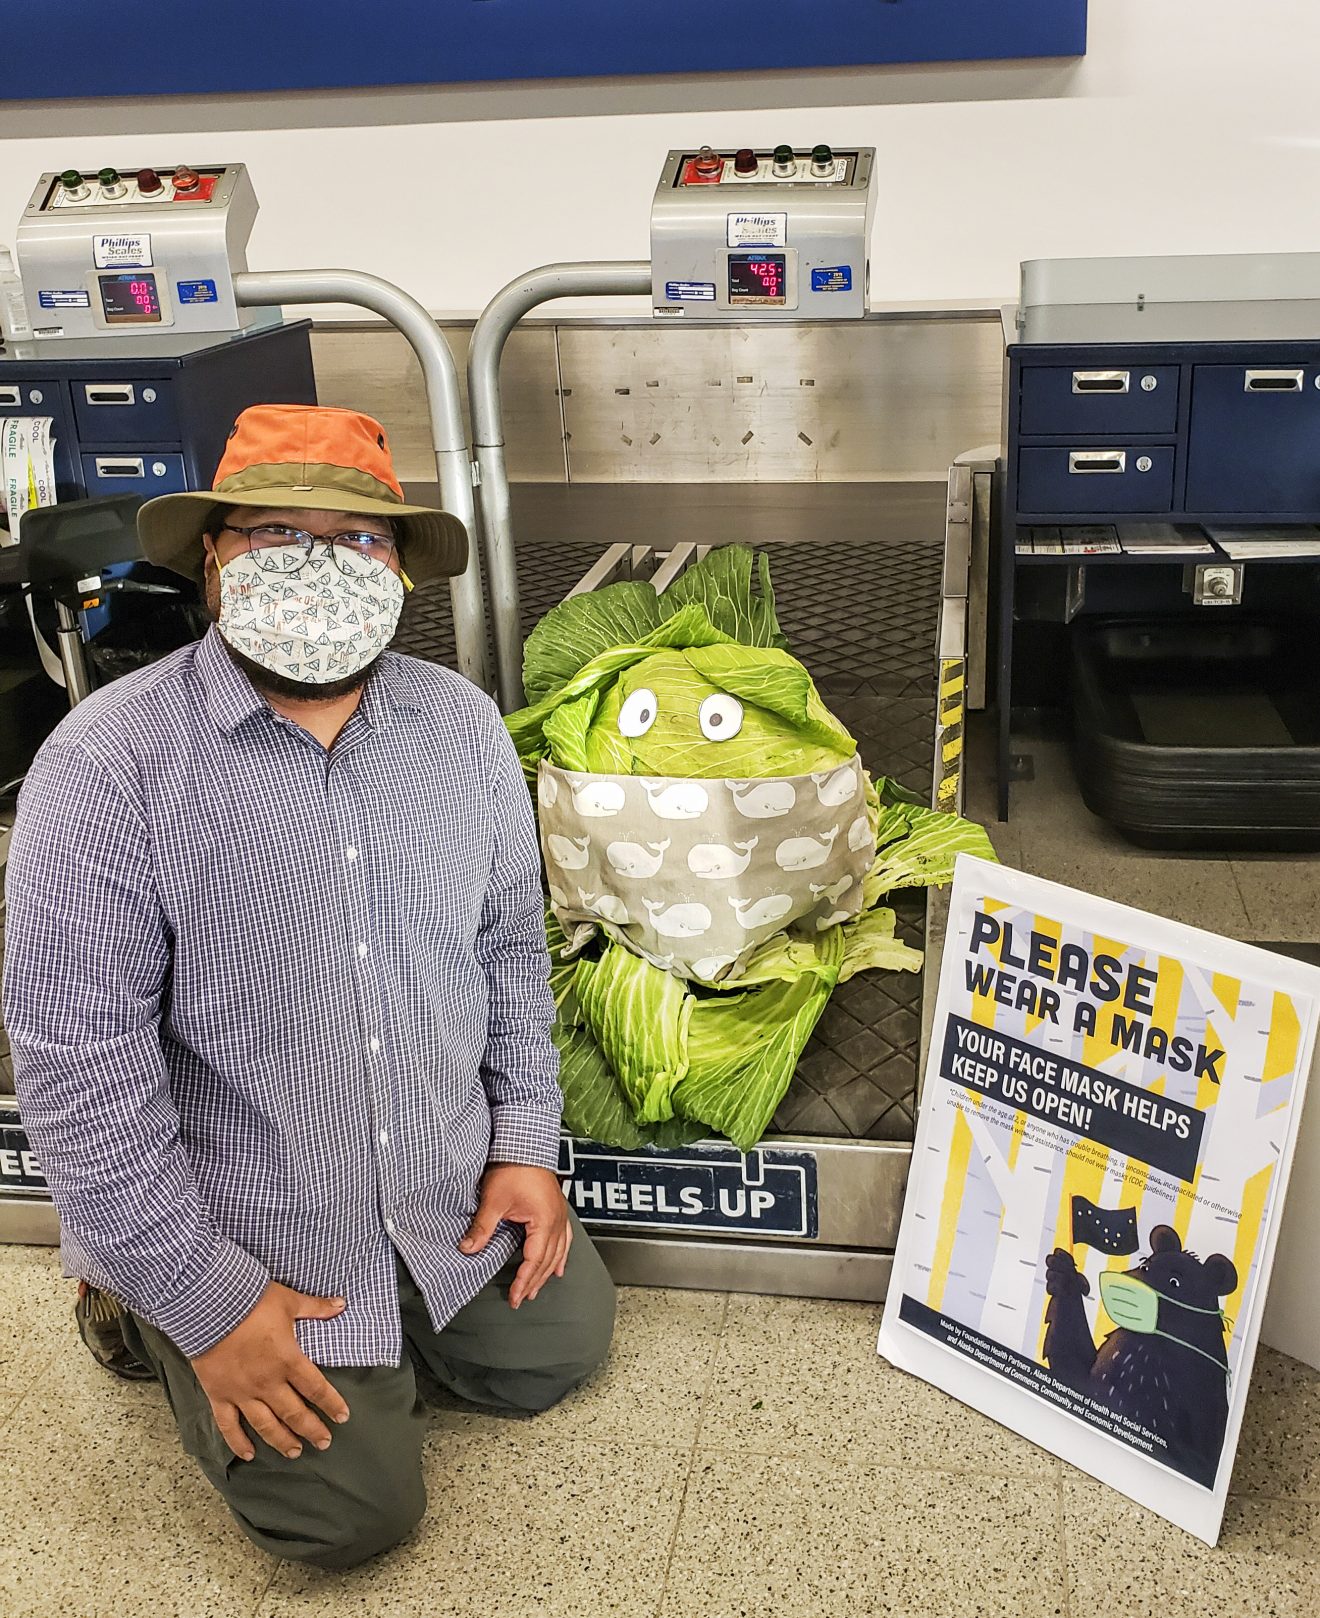 A large cabbage with googly eyes and a mask sits on an airport luggage scale, next to the man who grew it, also wearing a mask.